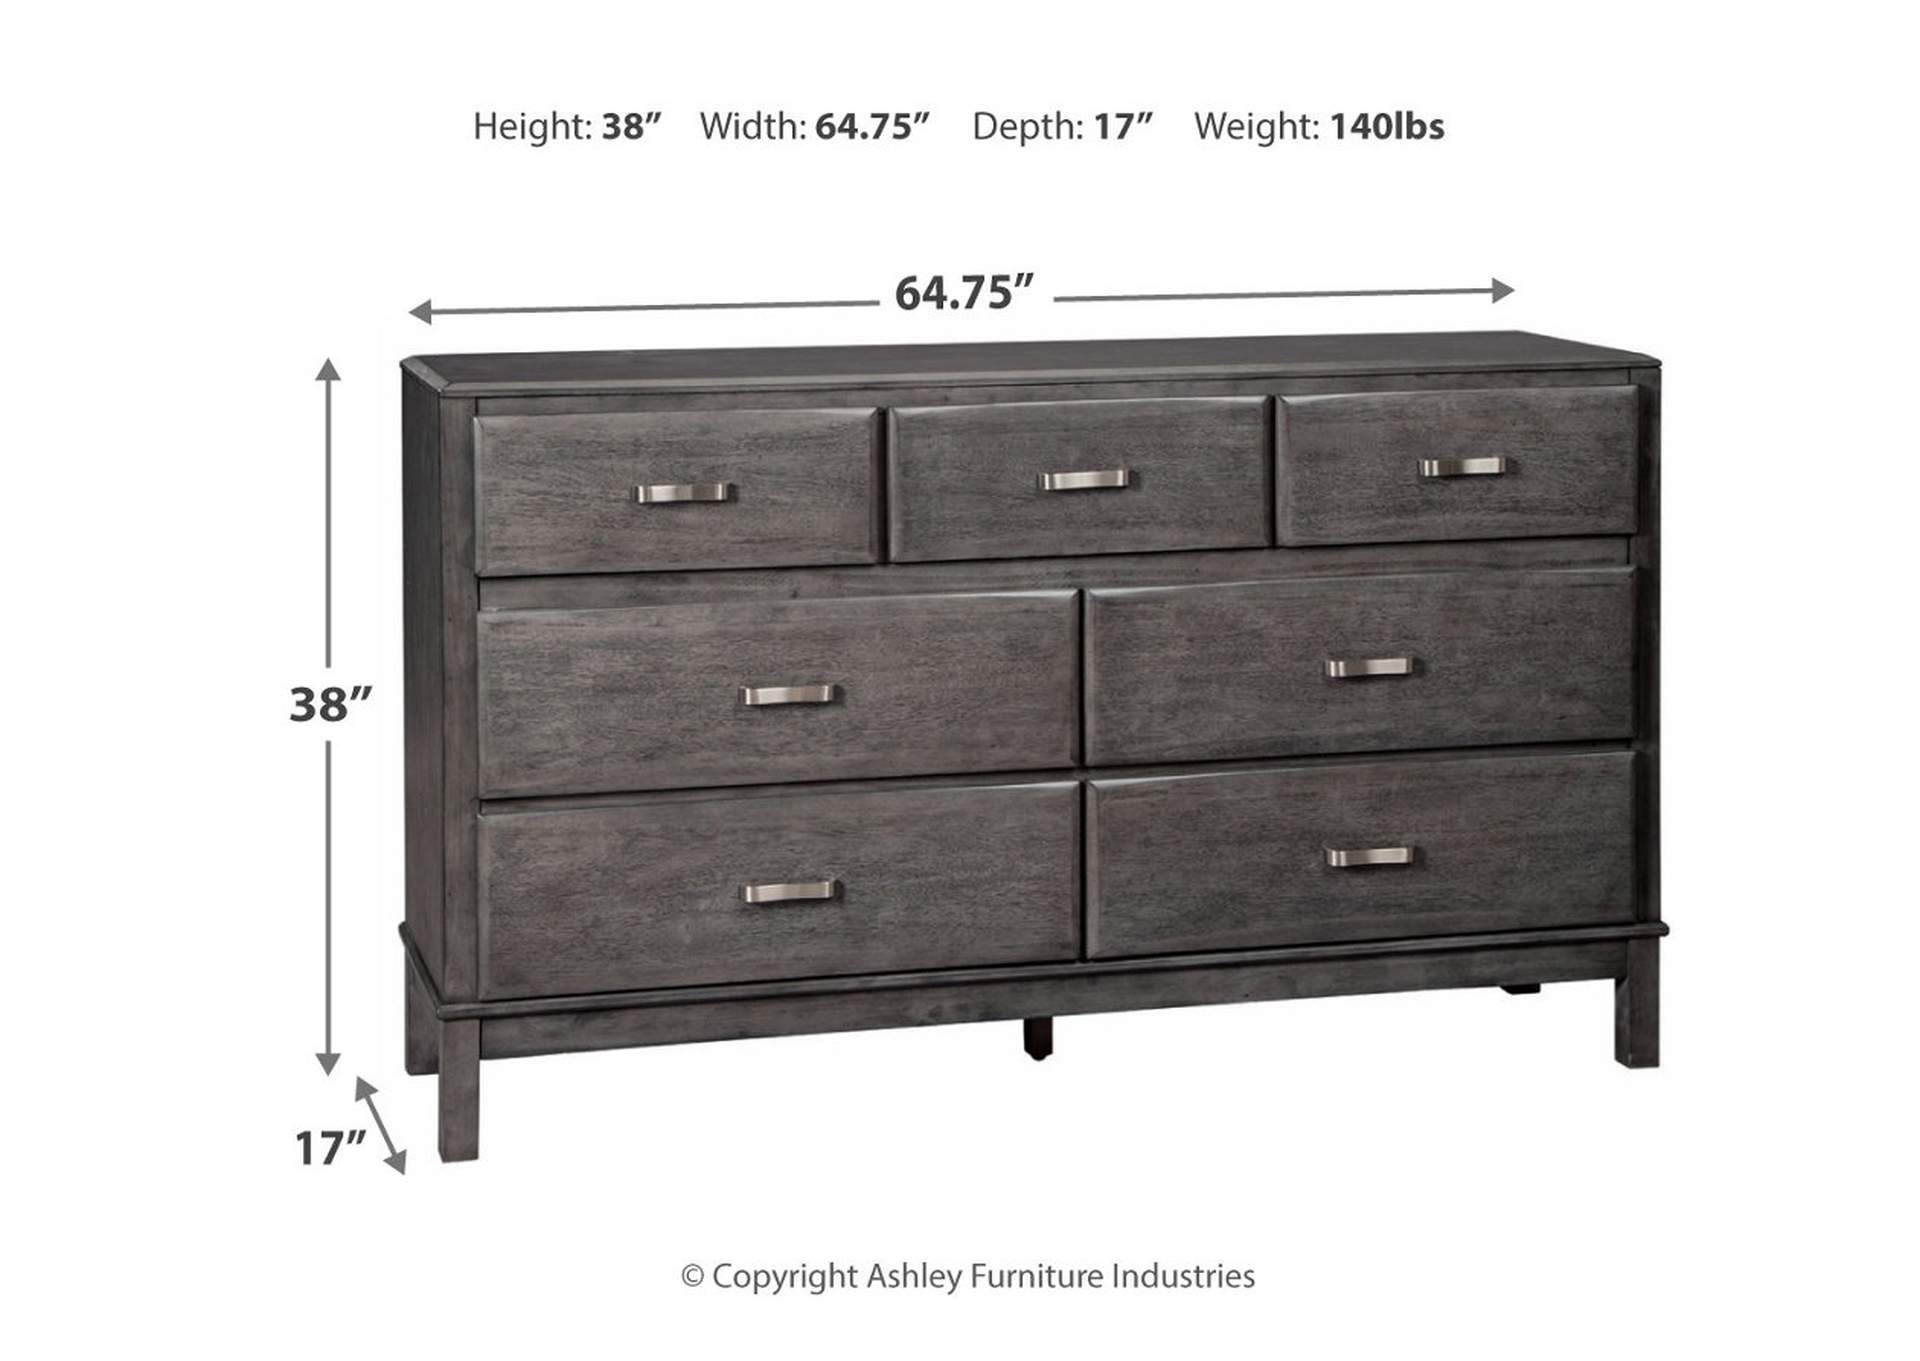 Caitbrook King Storage Bed, Dresser, Chest and 2 Nightstands,Signature Design By Ashley